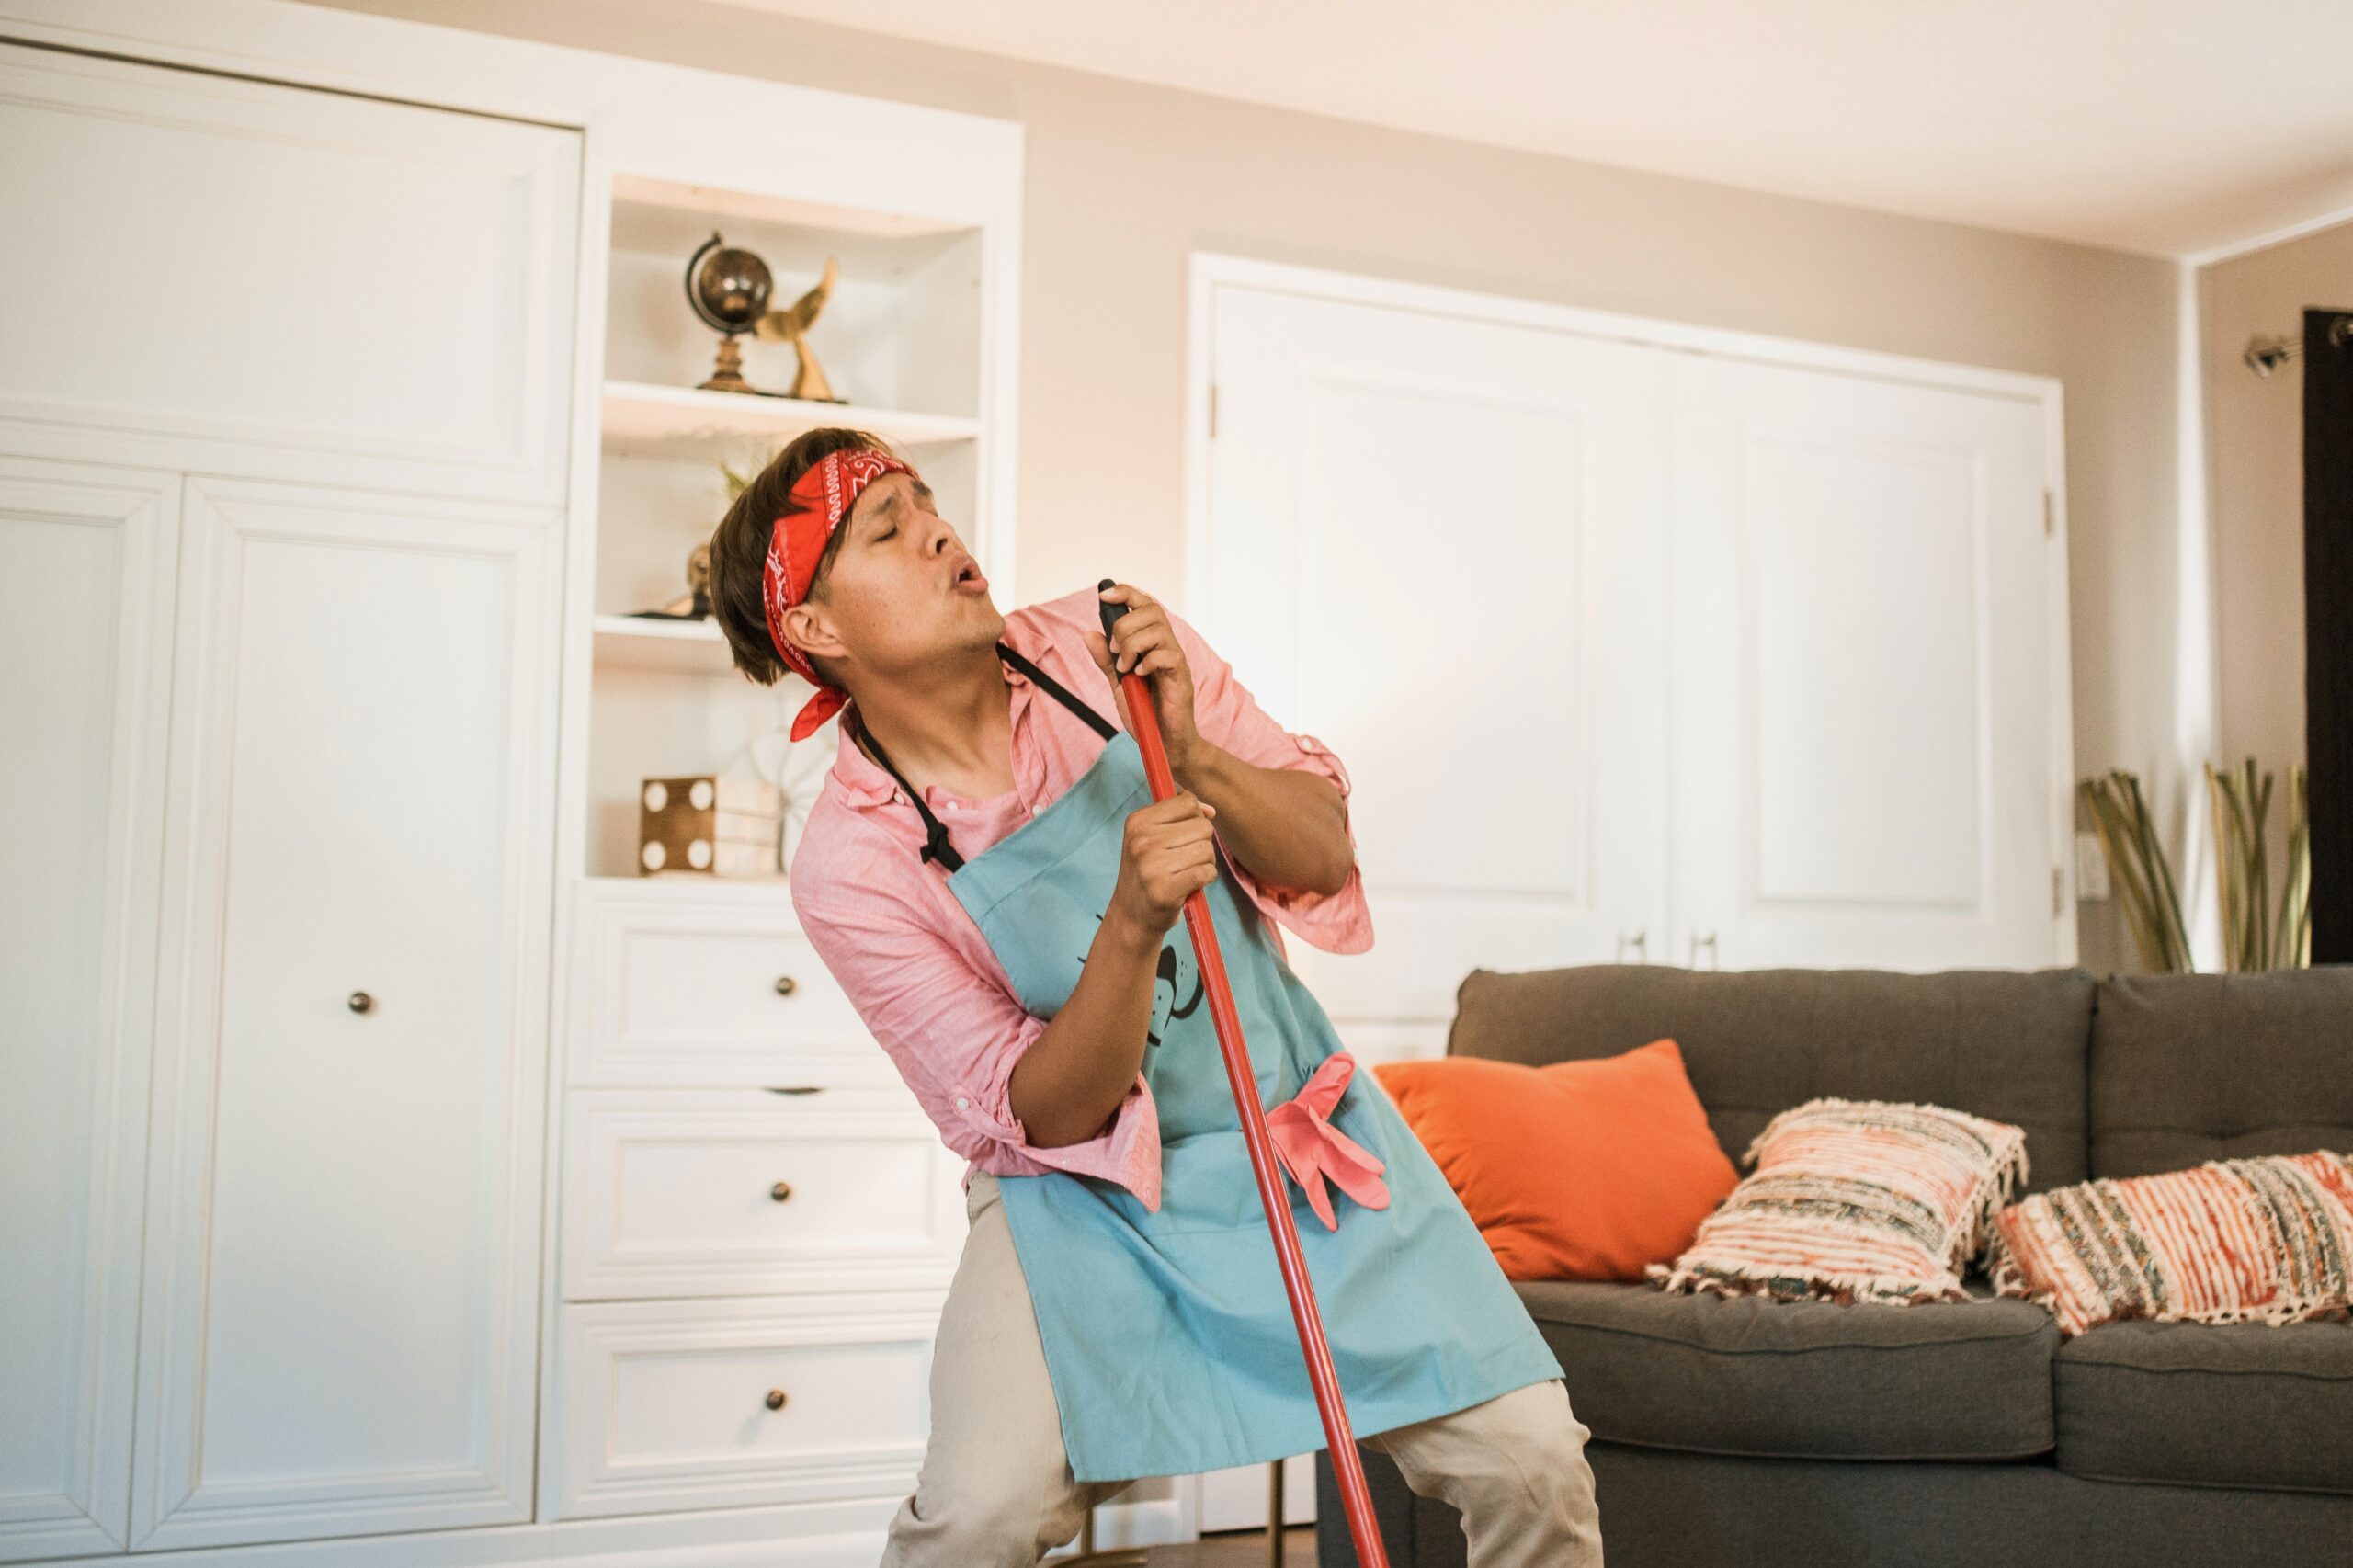 A man is holding a broom or mop handle and singing into it.